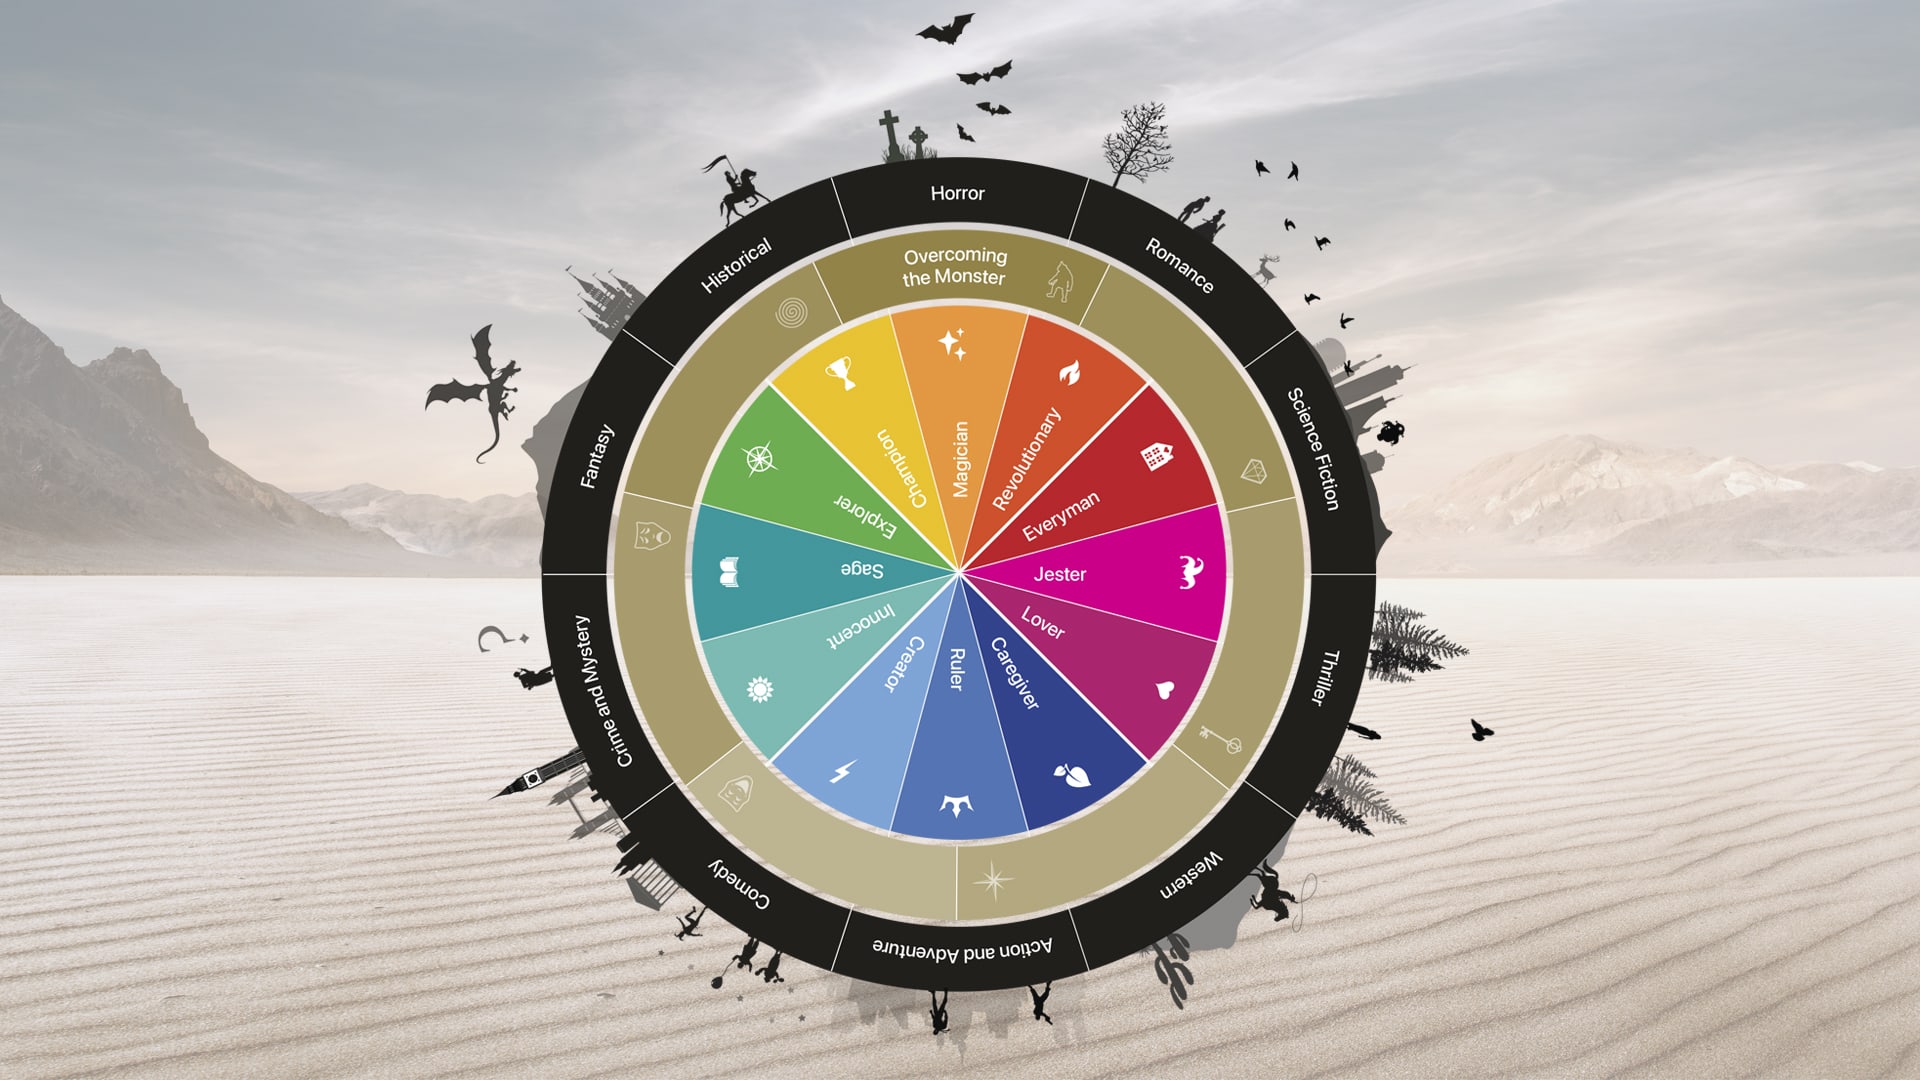 A wheel of fortune style graphic against the backdrop of a mythical landscape. Each differently coloured wheel segment contains the name of a different character archetype in white text. In the solid black outer wheel, the names of different story genres appear in white text. Around the edge of the wheel are all black illustrations or symbols associated with fairytales such as a dragon, knight and castle.